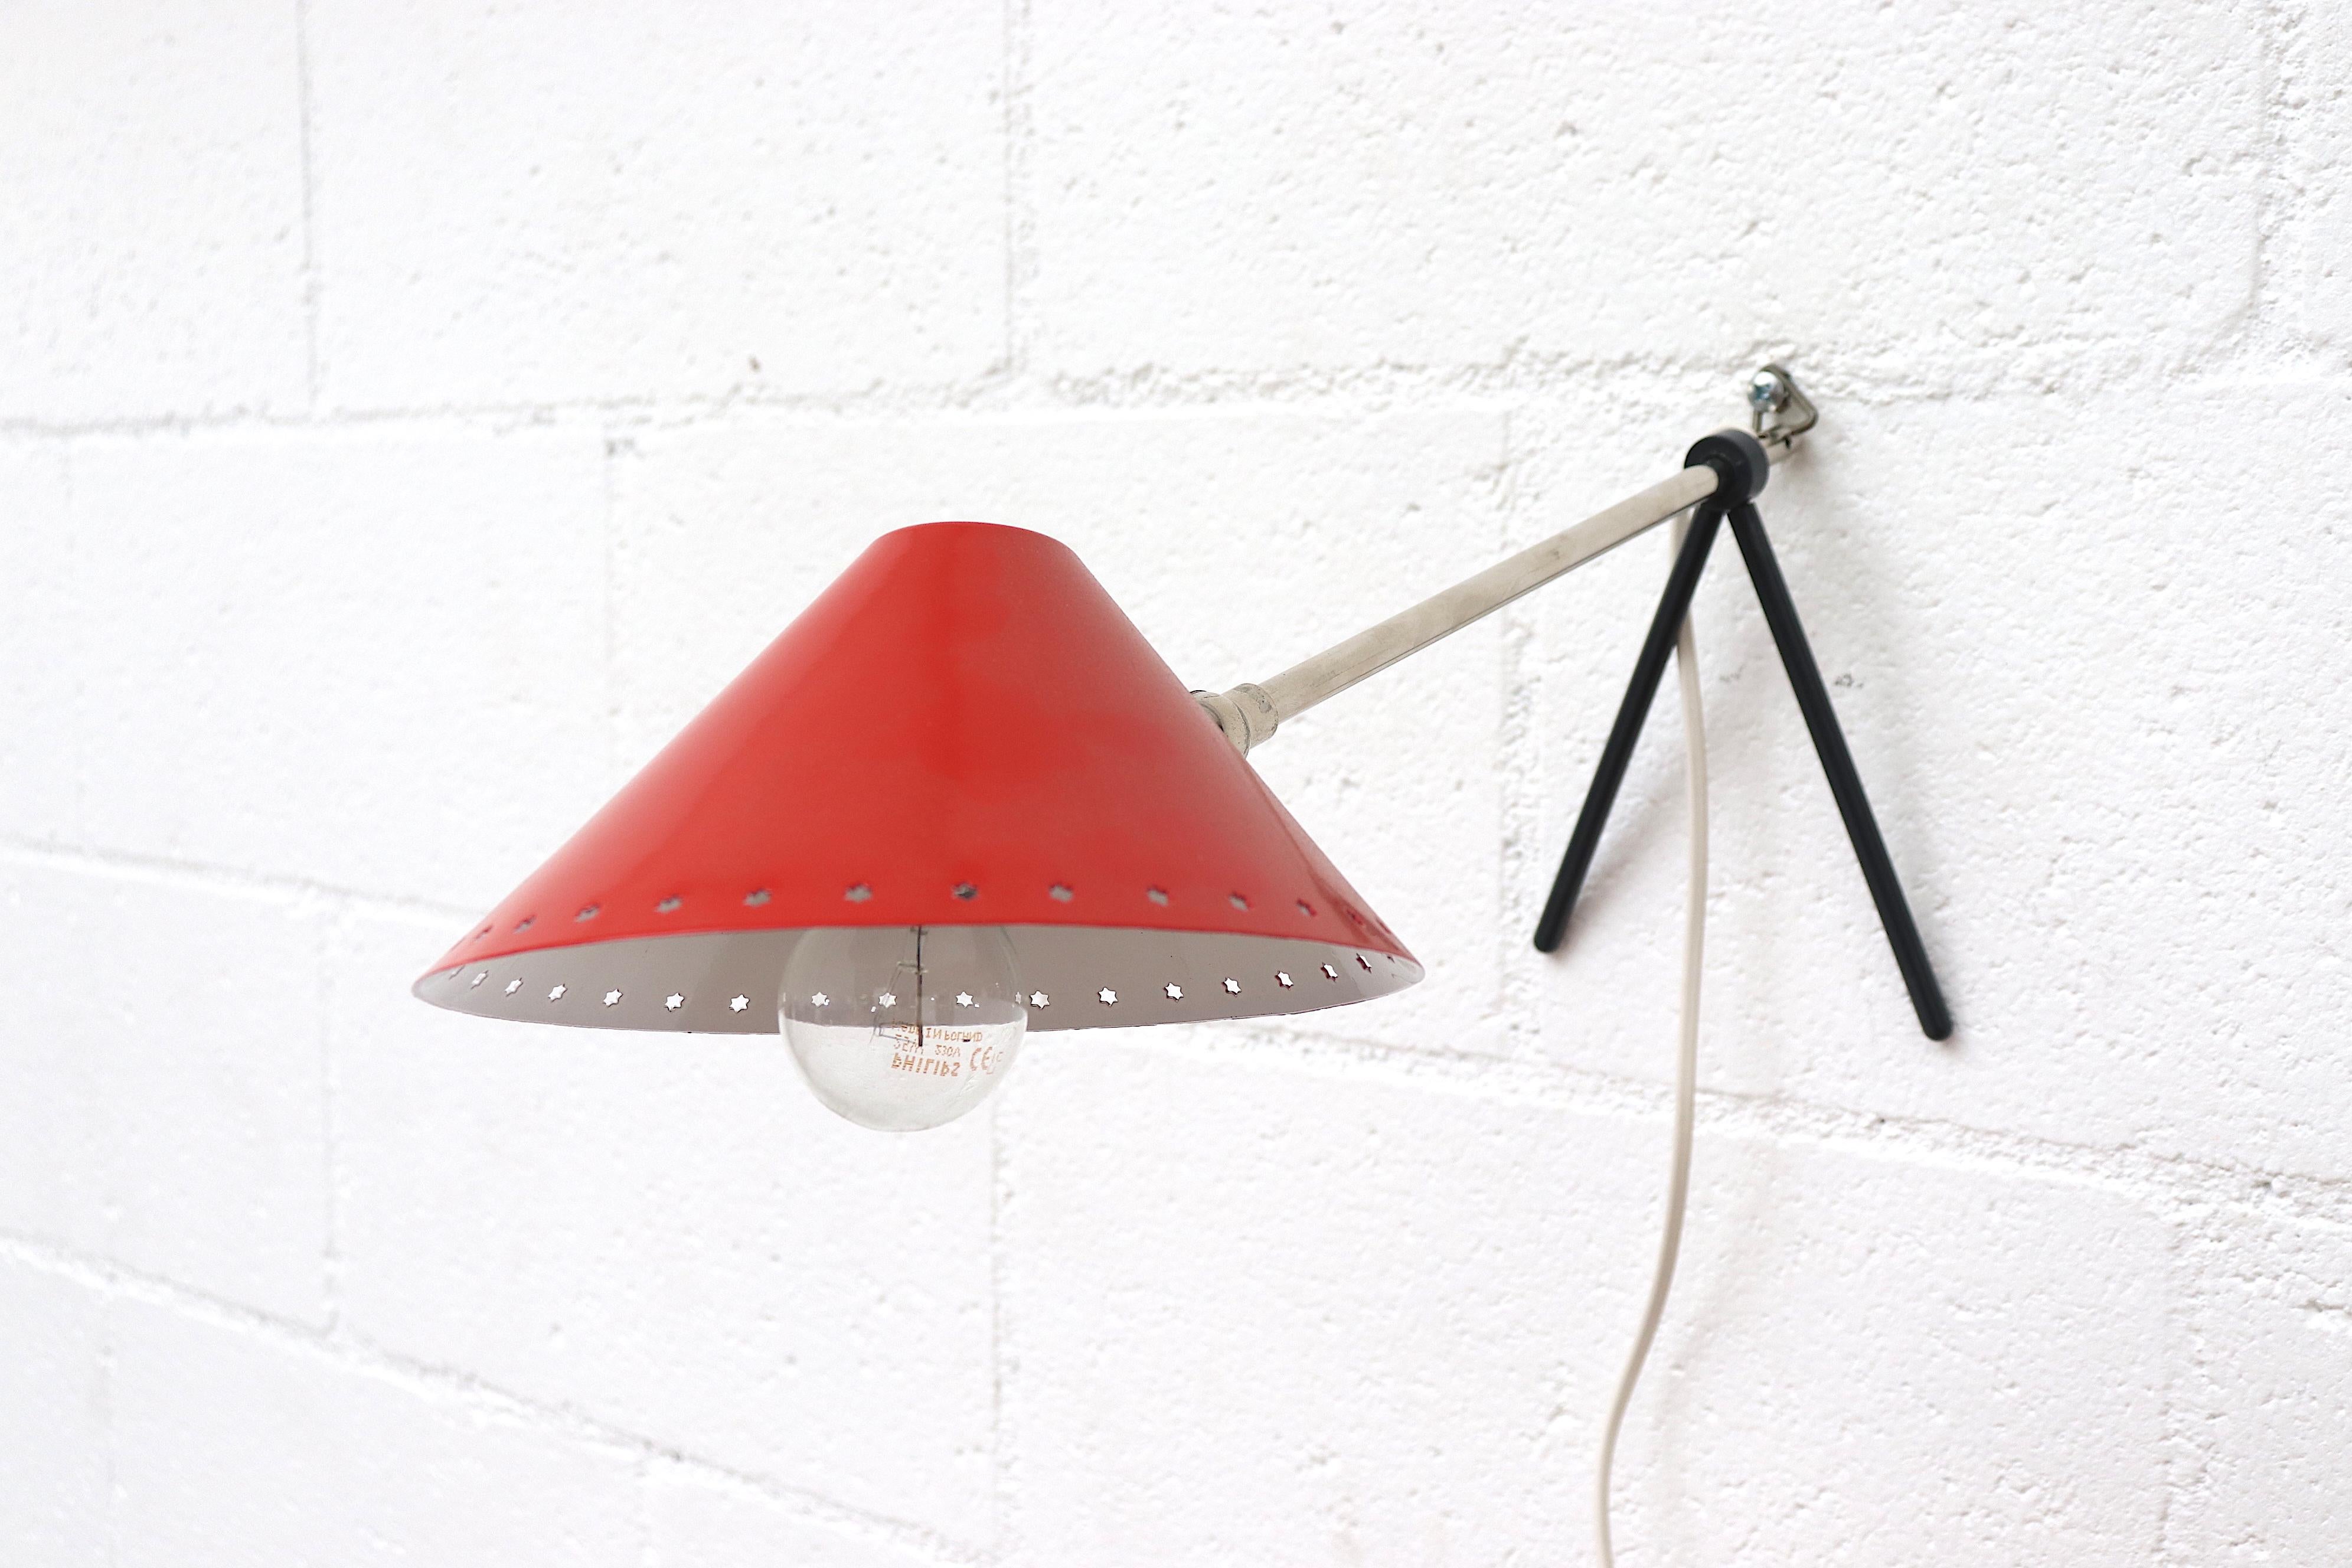 Hala Zeist red enameled metal table or wall lamp with pinocchio shade. Versatile small lamps that function as both table lamp and wall lamp. Great as bedside lamps. Priced individually. In original condition with wear consistent with age and use.